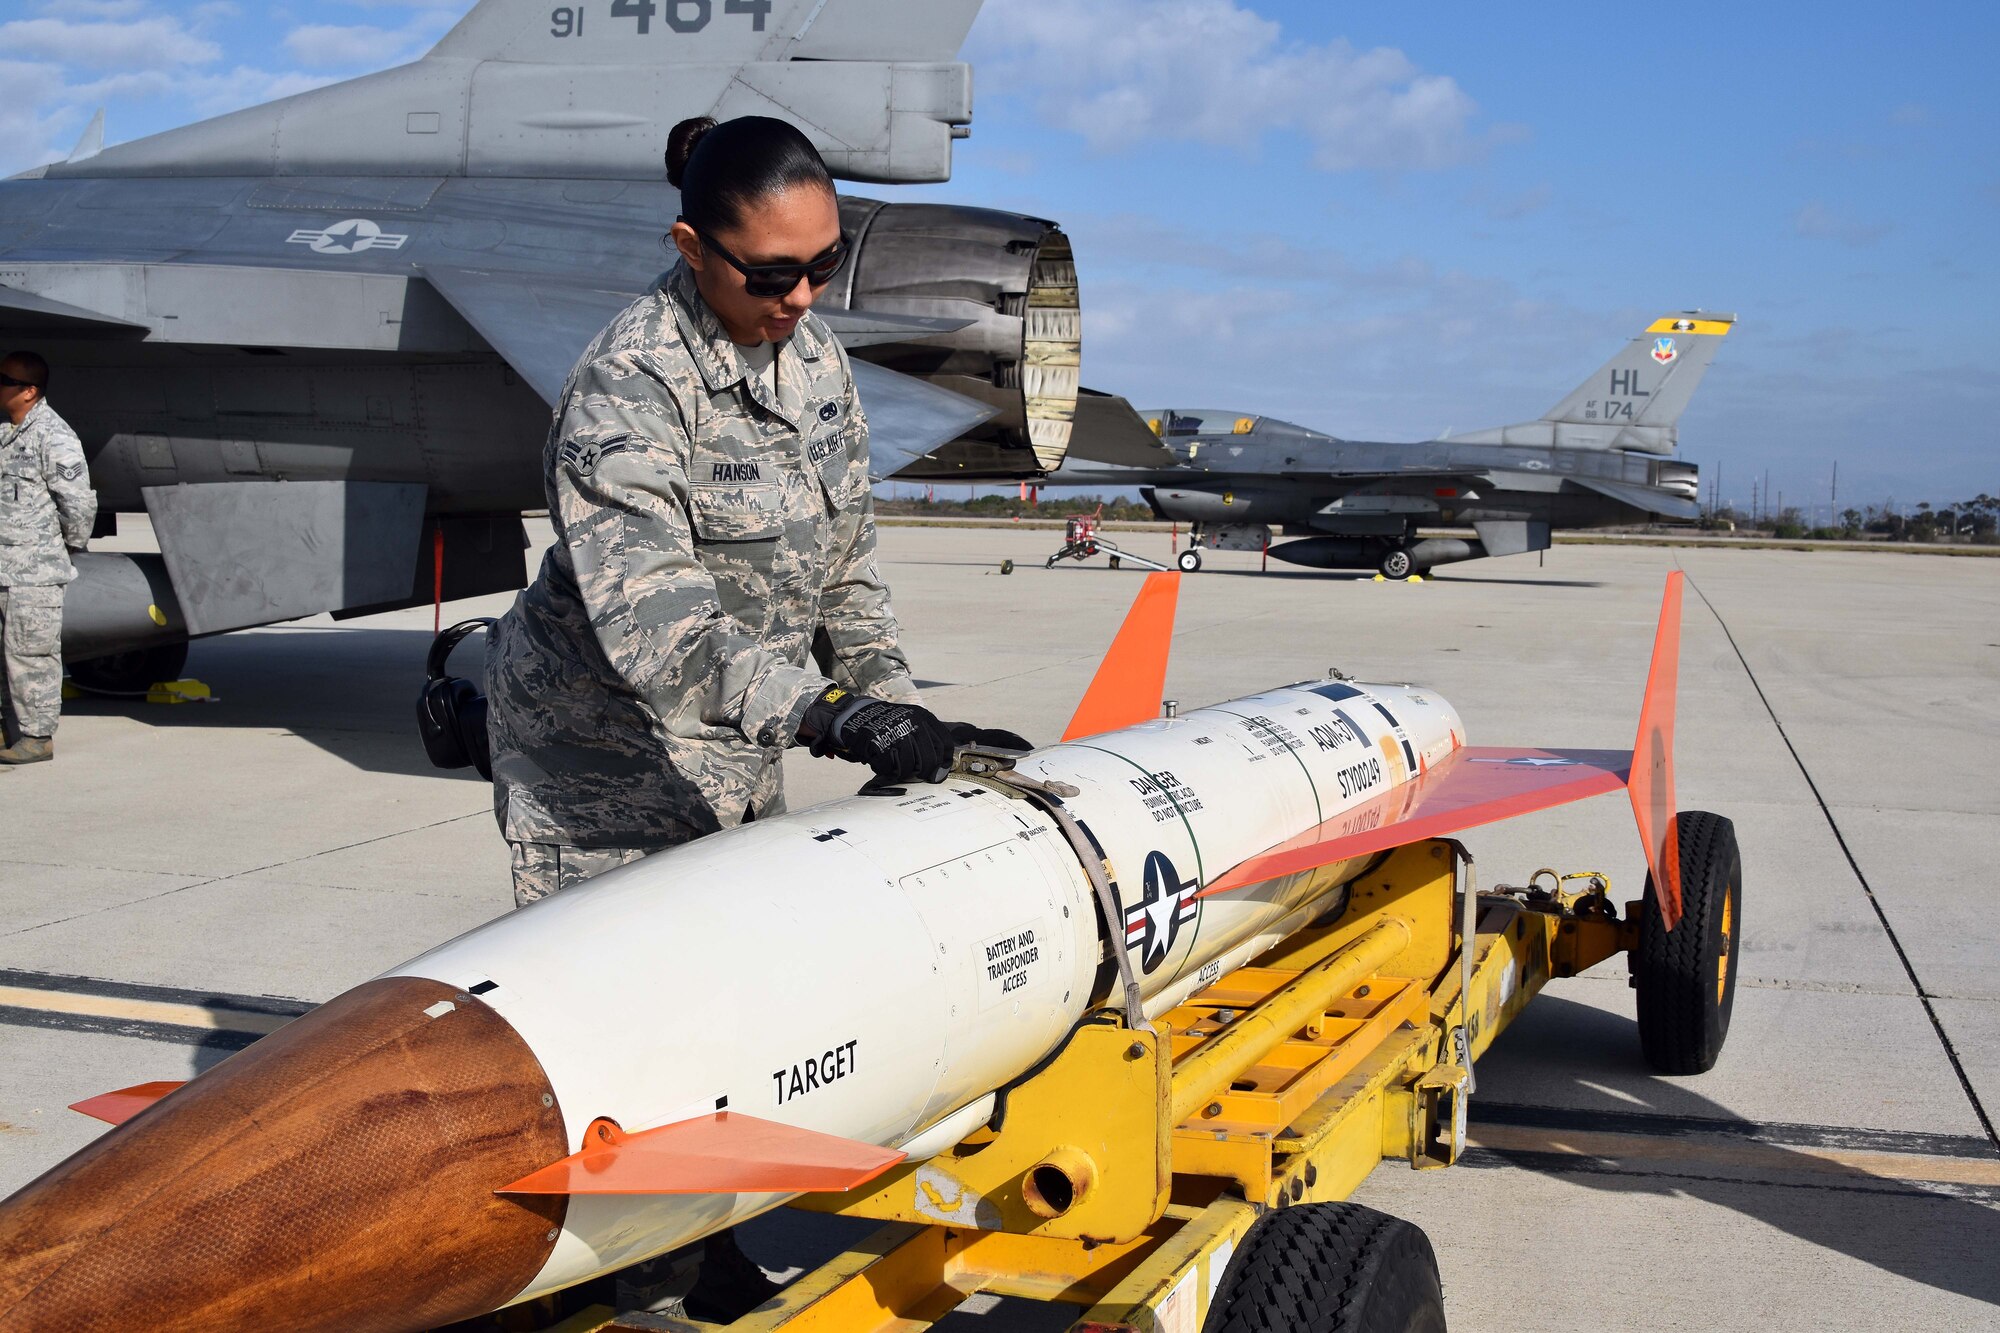 Airman 1st Class Cierra-Mae Hanson, 412th Maintenance Group, inspects an AQM-37D supersonic target before it is loaded on to an Edwards Air Force Base F-16 at Naval Air Station Point Mugu, California, Nov. 28, 2018. Two F-16s, a KC-135 Stratotanker, and maintenance Airmen from Edwards assisted the U.S. Navy and Royal Australian Navy with a test of a Royal Australian Navy ship’s combat system late last year. (U.S. Navy photo by BU3 Dakota Fink)